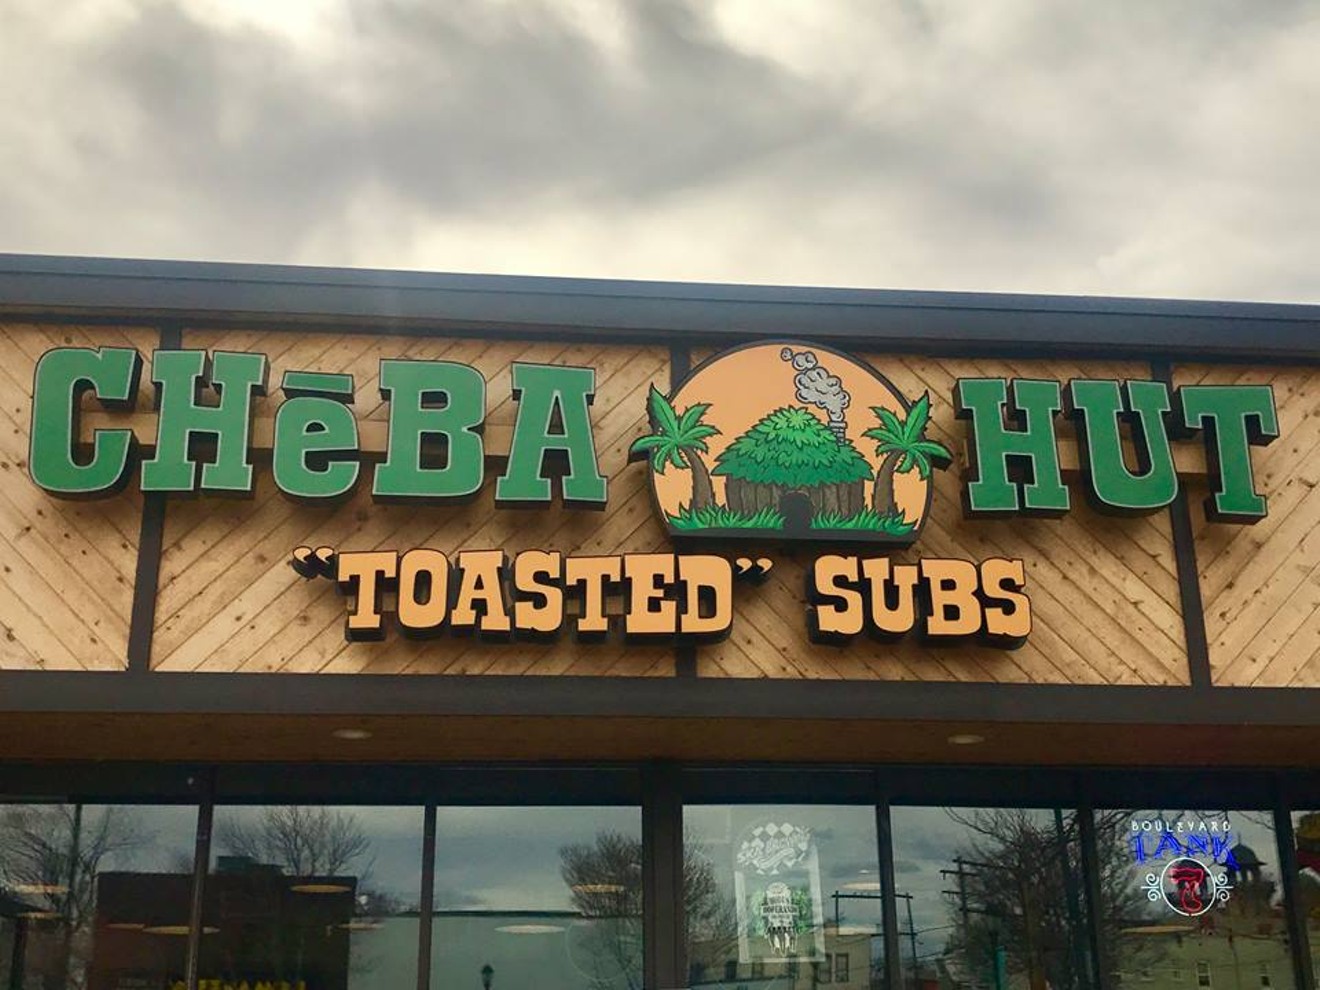 Cheba Hut's location at 638 East Colfax Avenue received multiple violations for public cannabis consumption on April 20, according to the Denver Police Department.